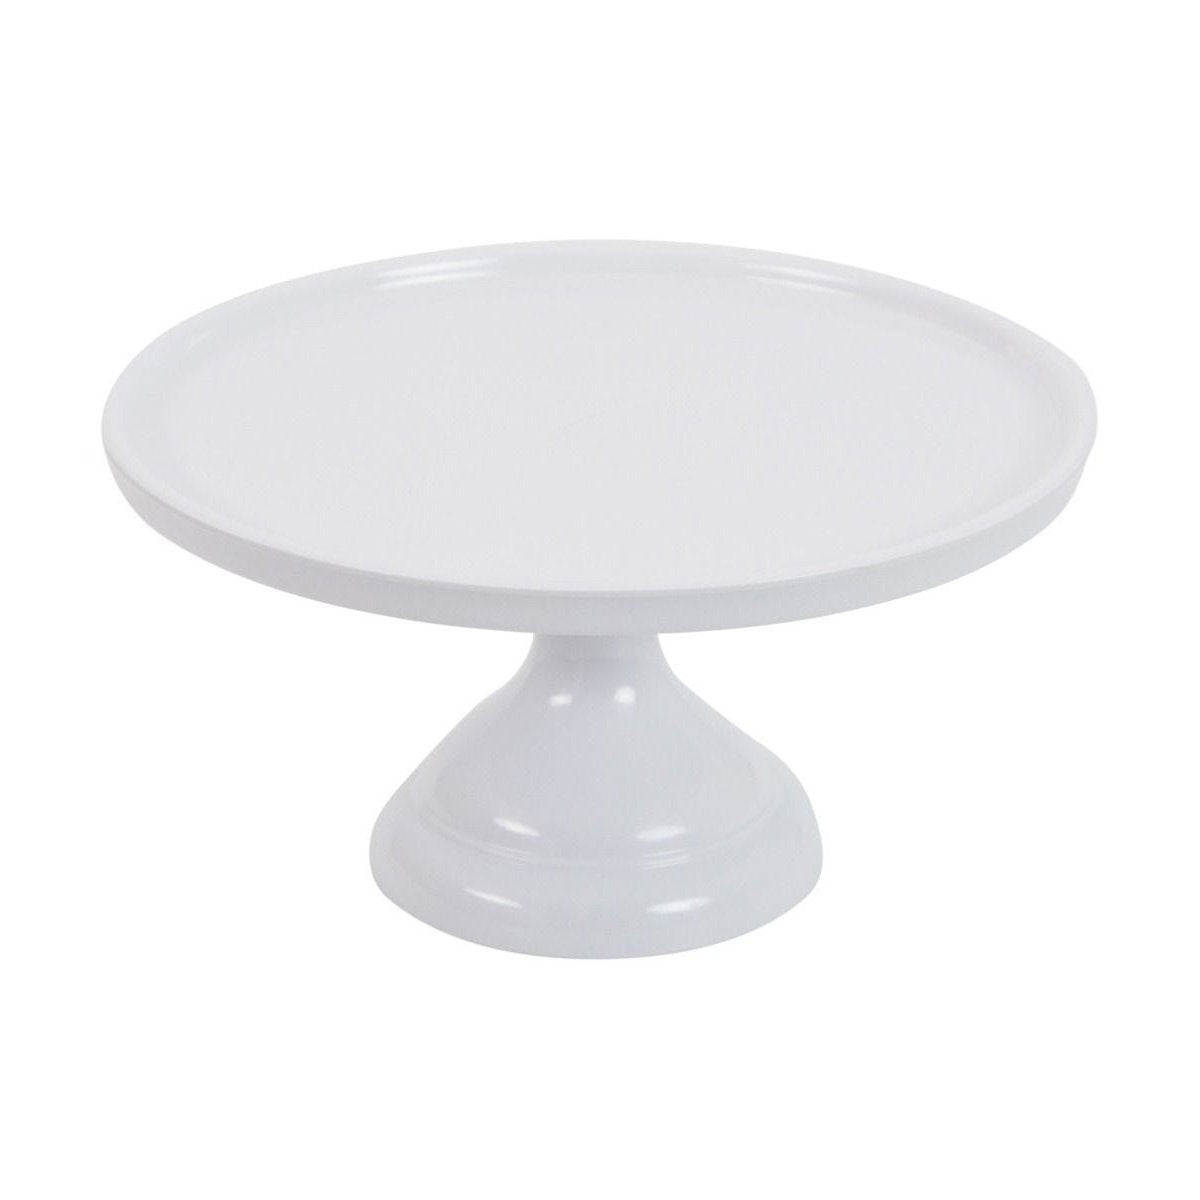 a-little-lovely-company-cake-stand-small-white- (1)